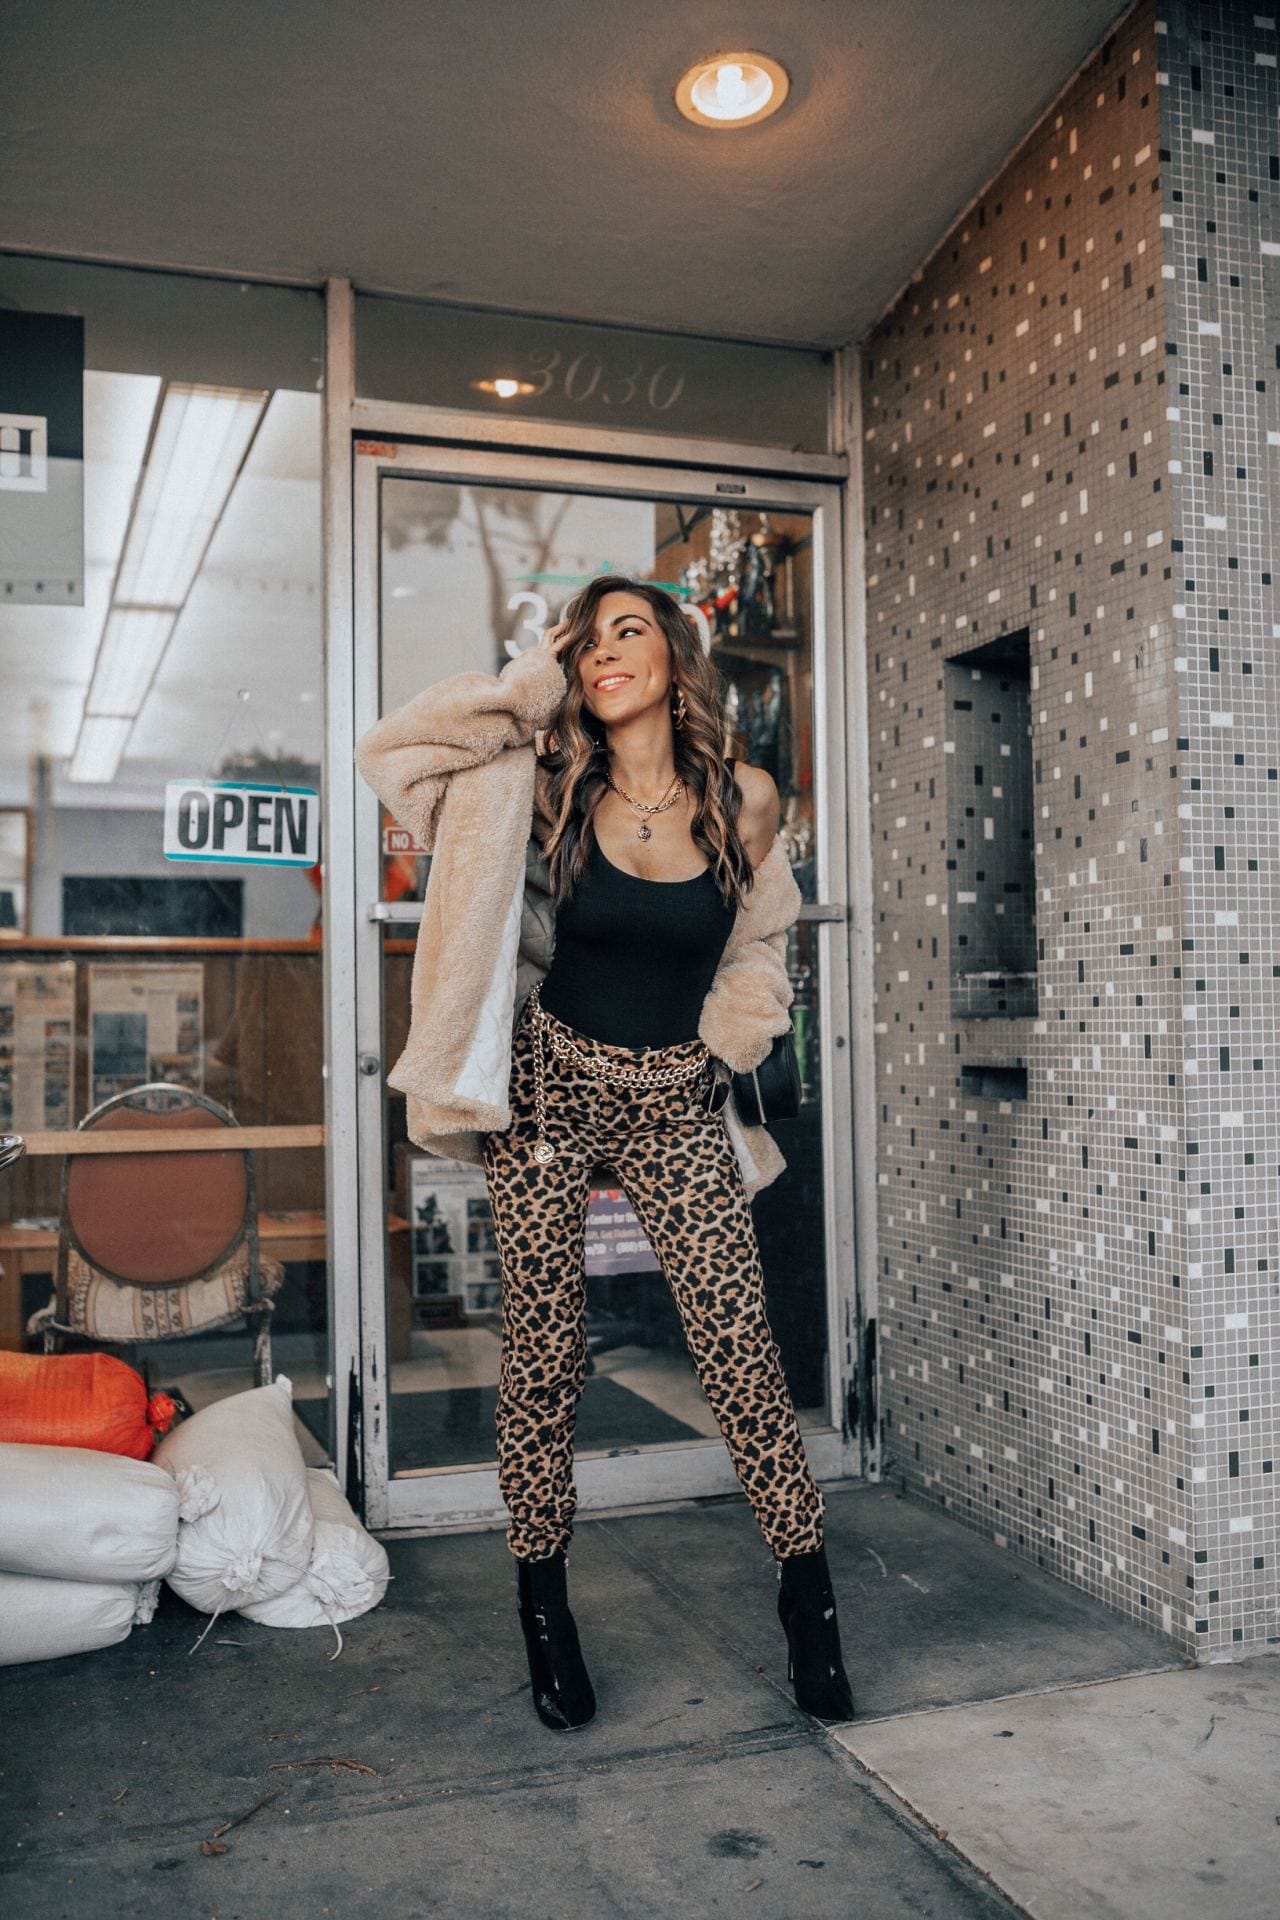 HOW TO STYLE LEOPARD PRINT TROUSERS FROM WINTER TO SPRING - Style